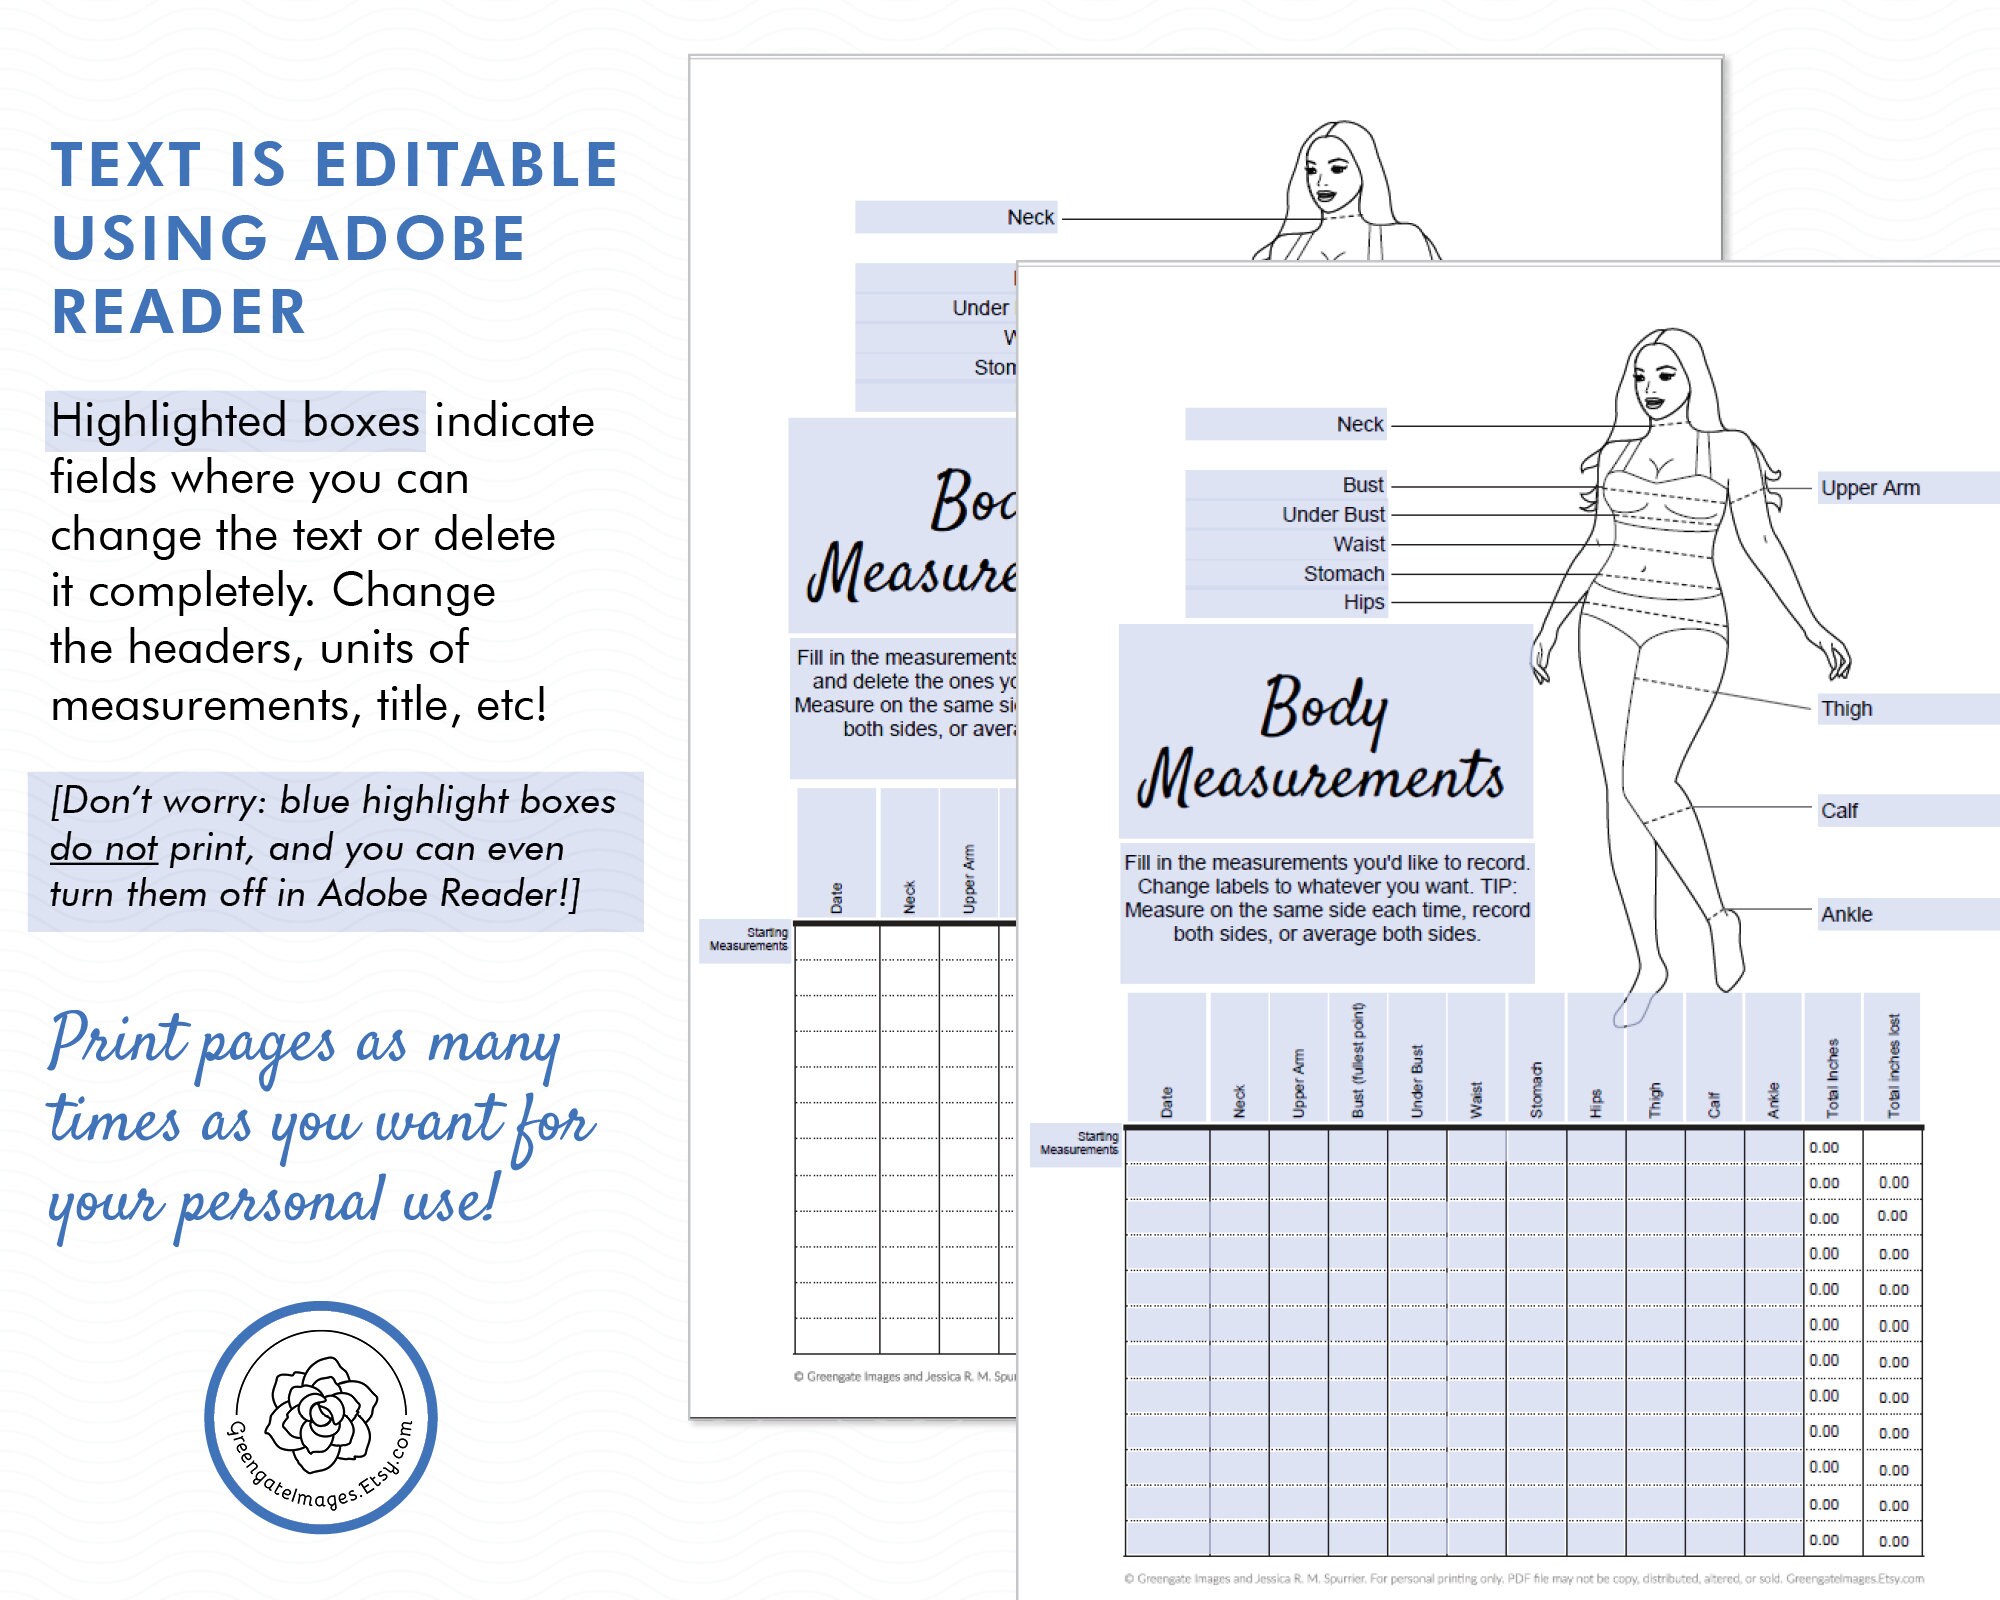 Body Measurements Tracker: Chart Body Measurement For Women / flexible tape  measure for body measurements , Journal, Notebook, Tracker, Keep Record